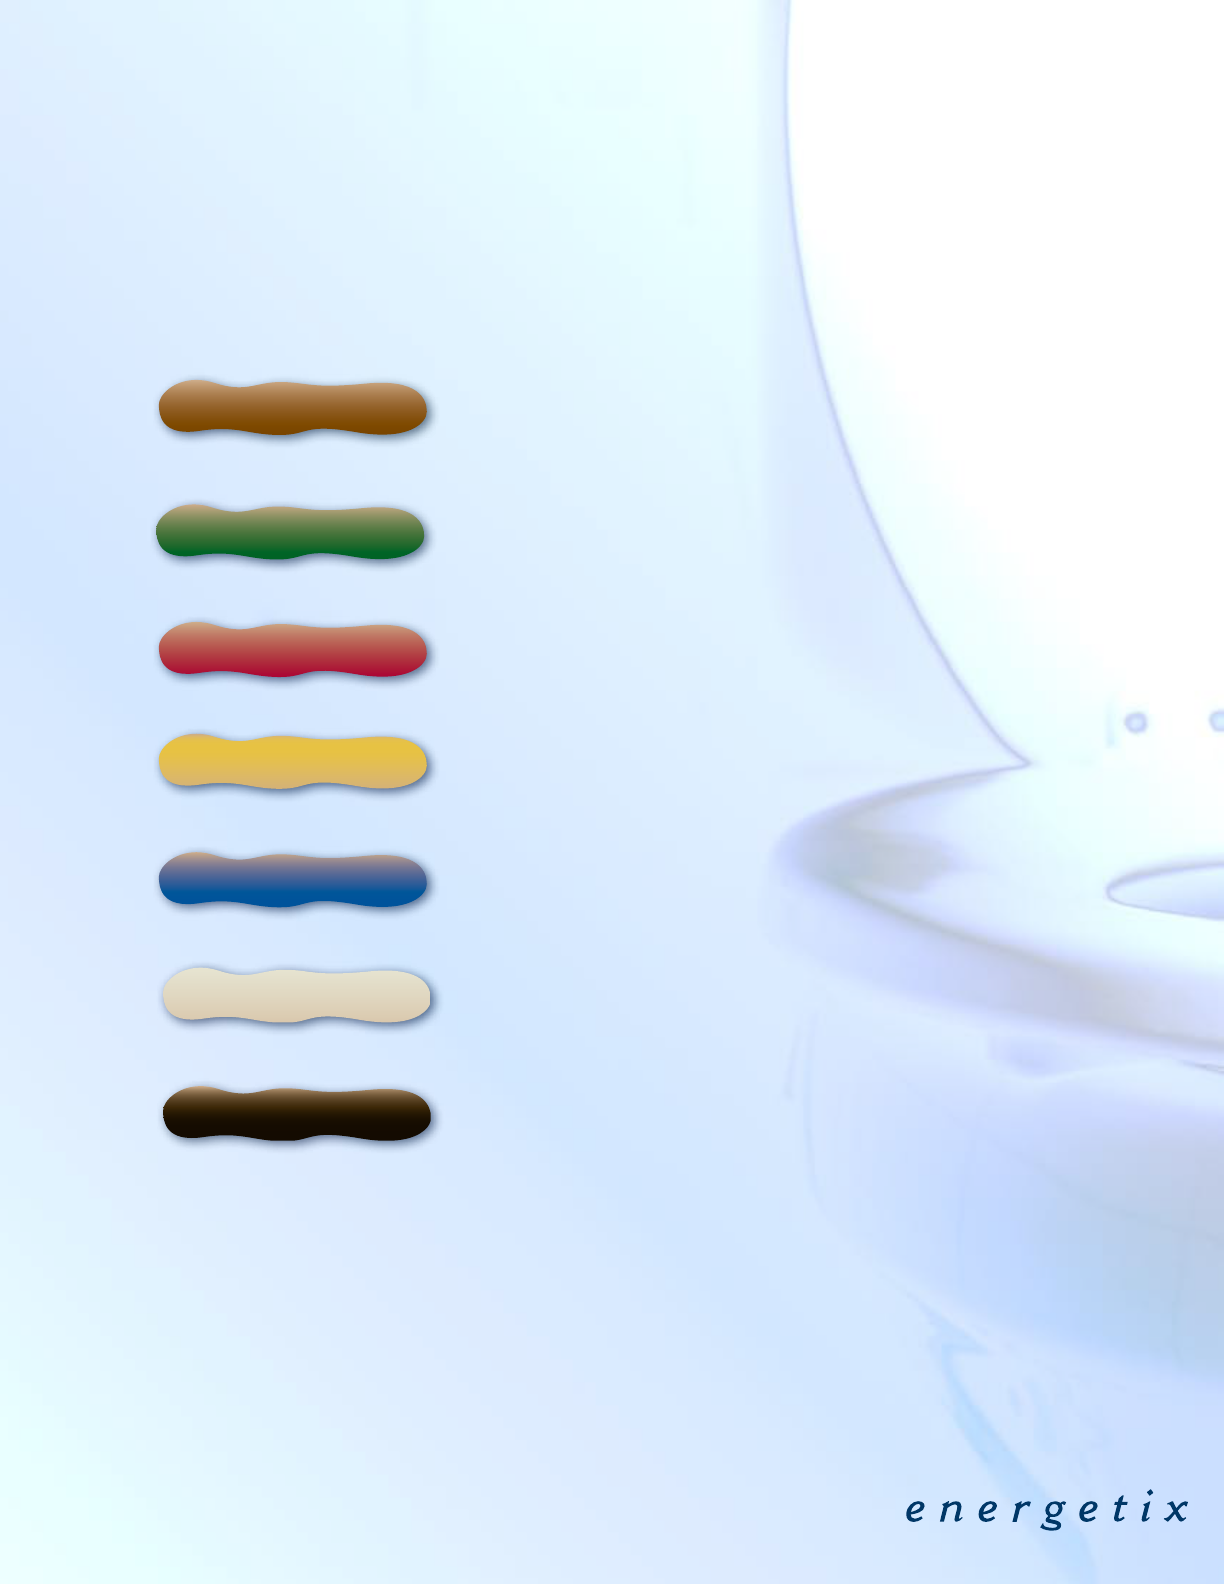 Stool Color Chart